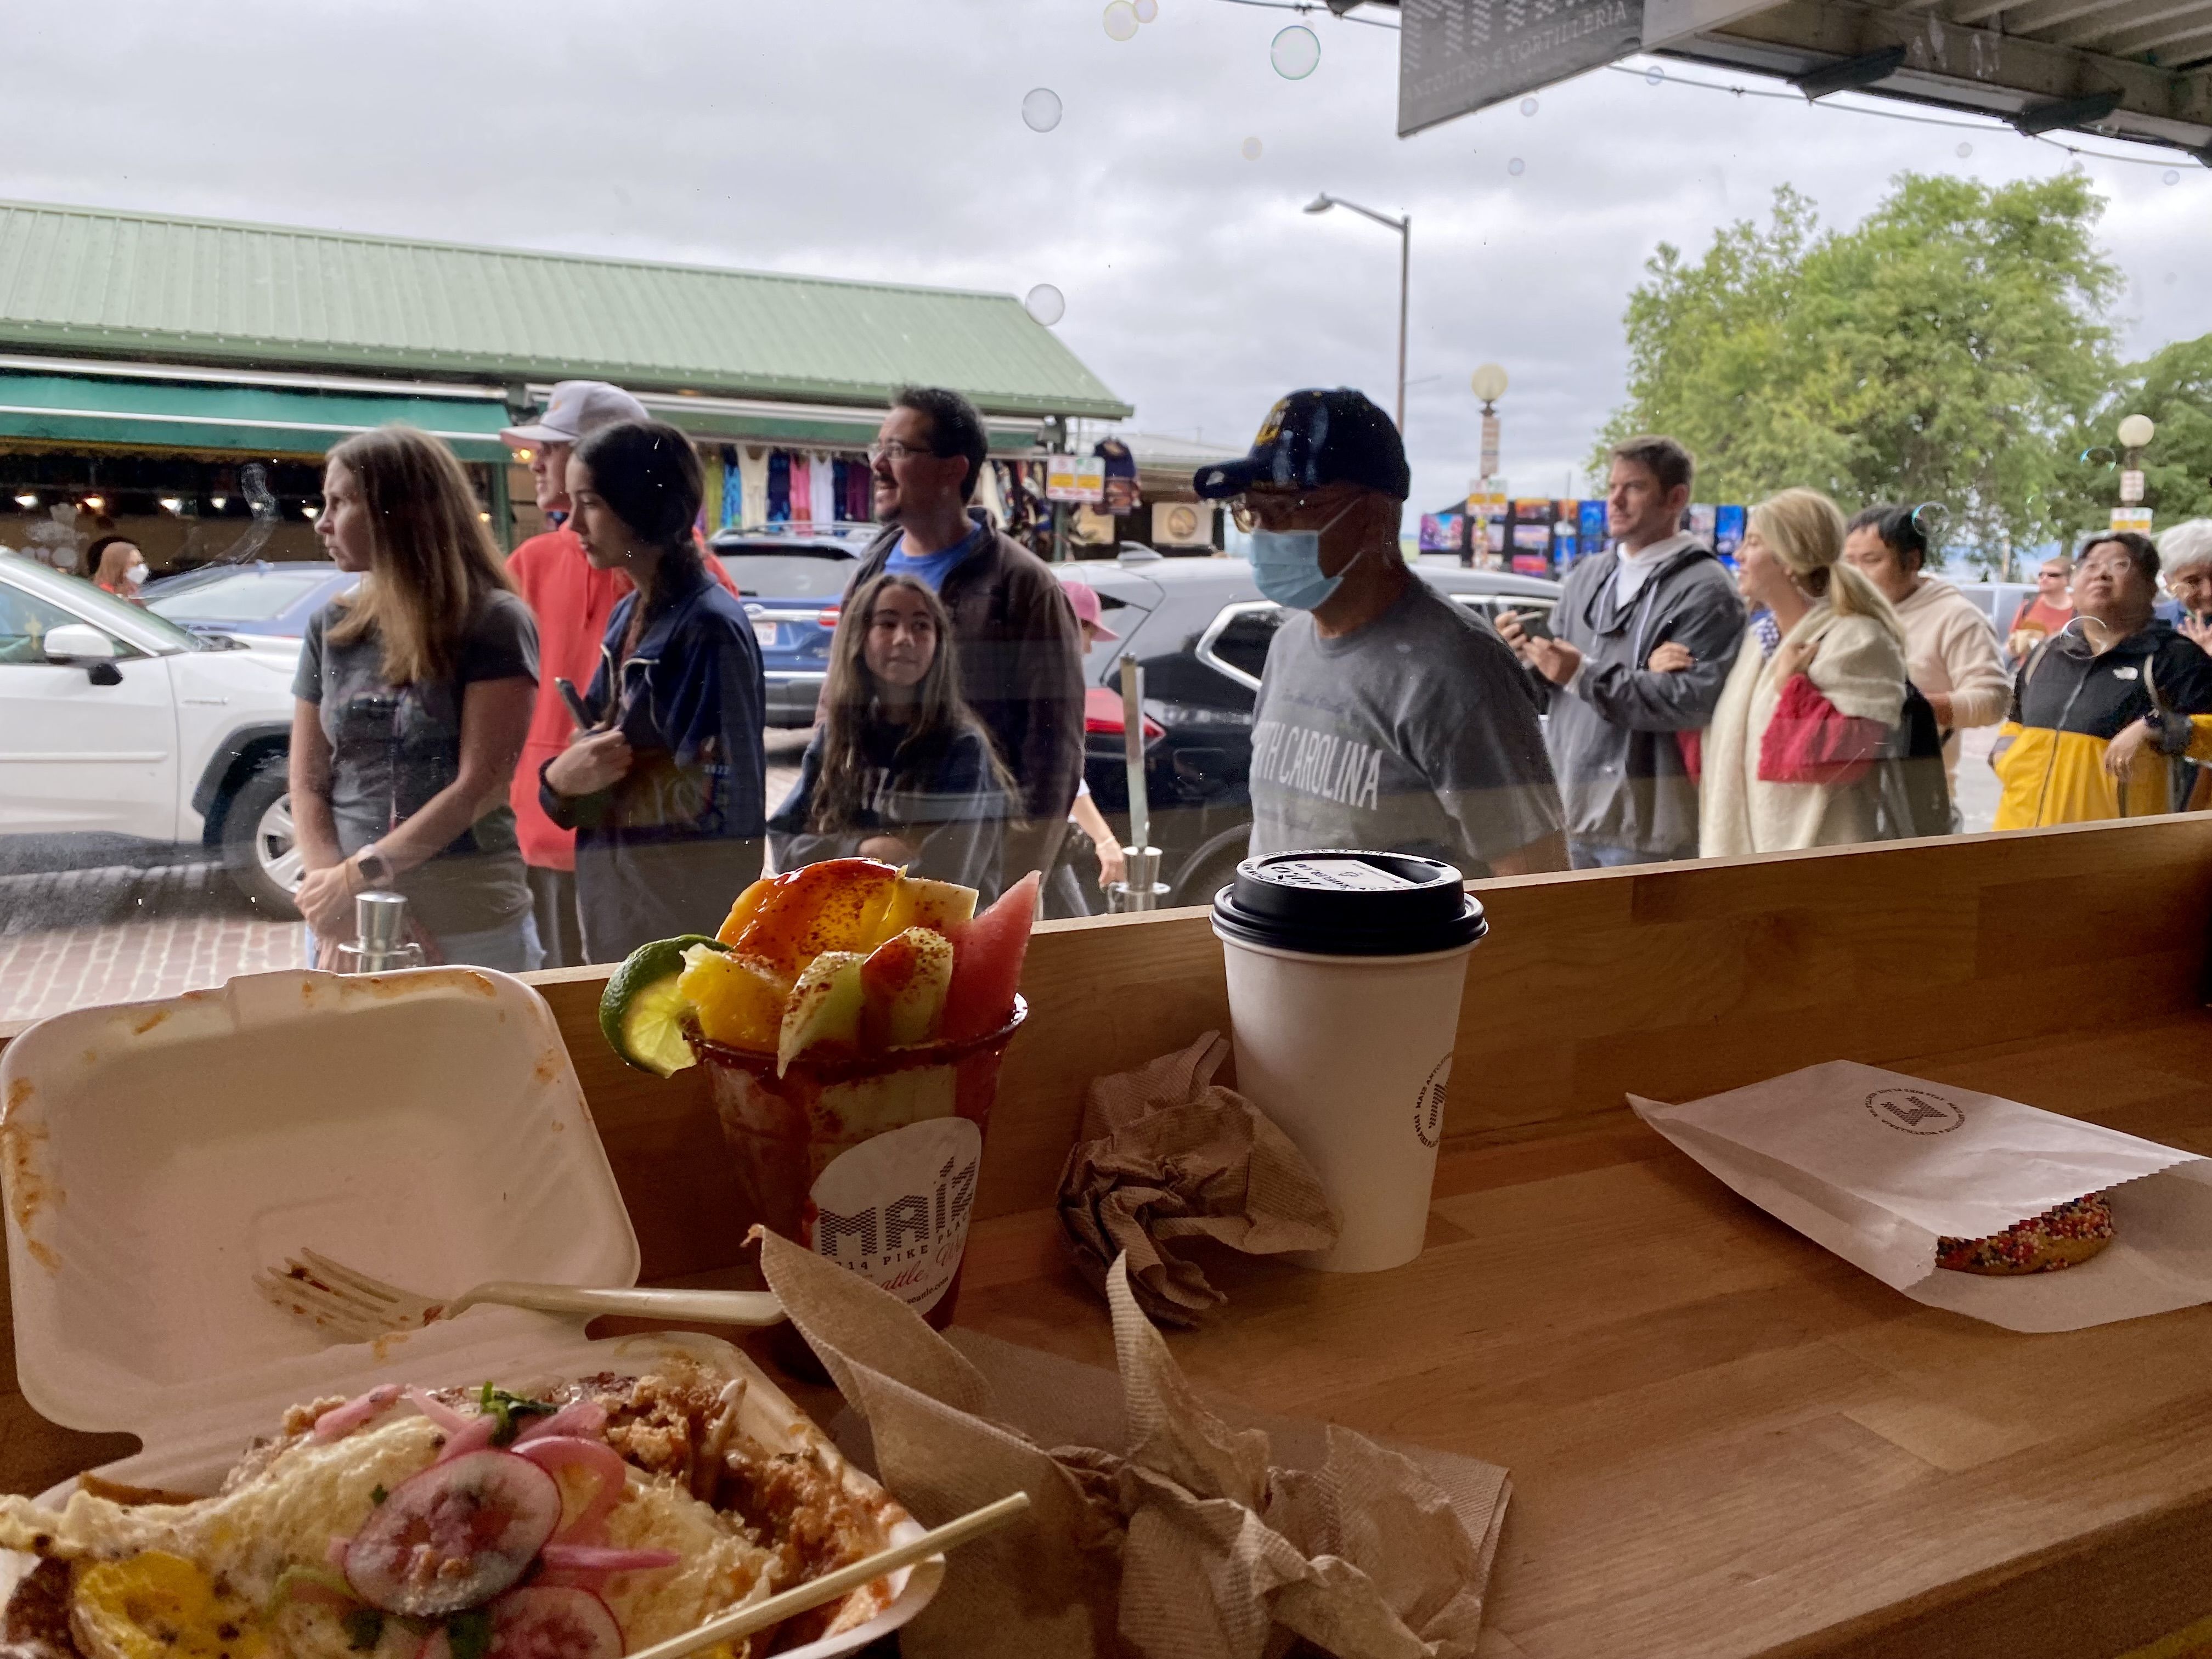 A counter with messy napkins, a to-go container of chilaquiles and a fruit cup, with a window showing a view of people waiting outside.